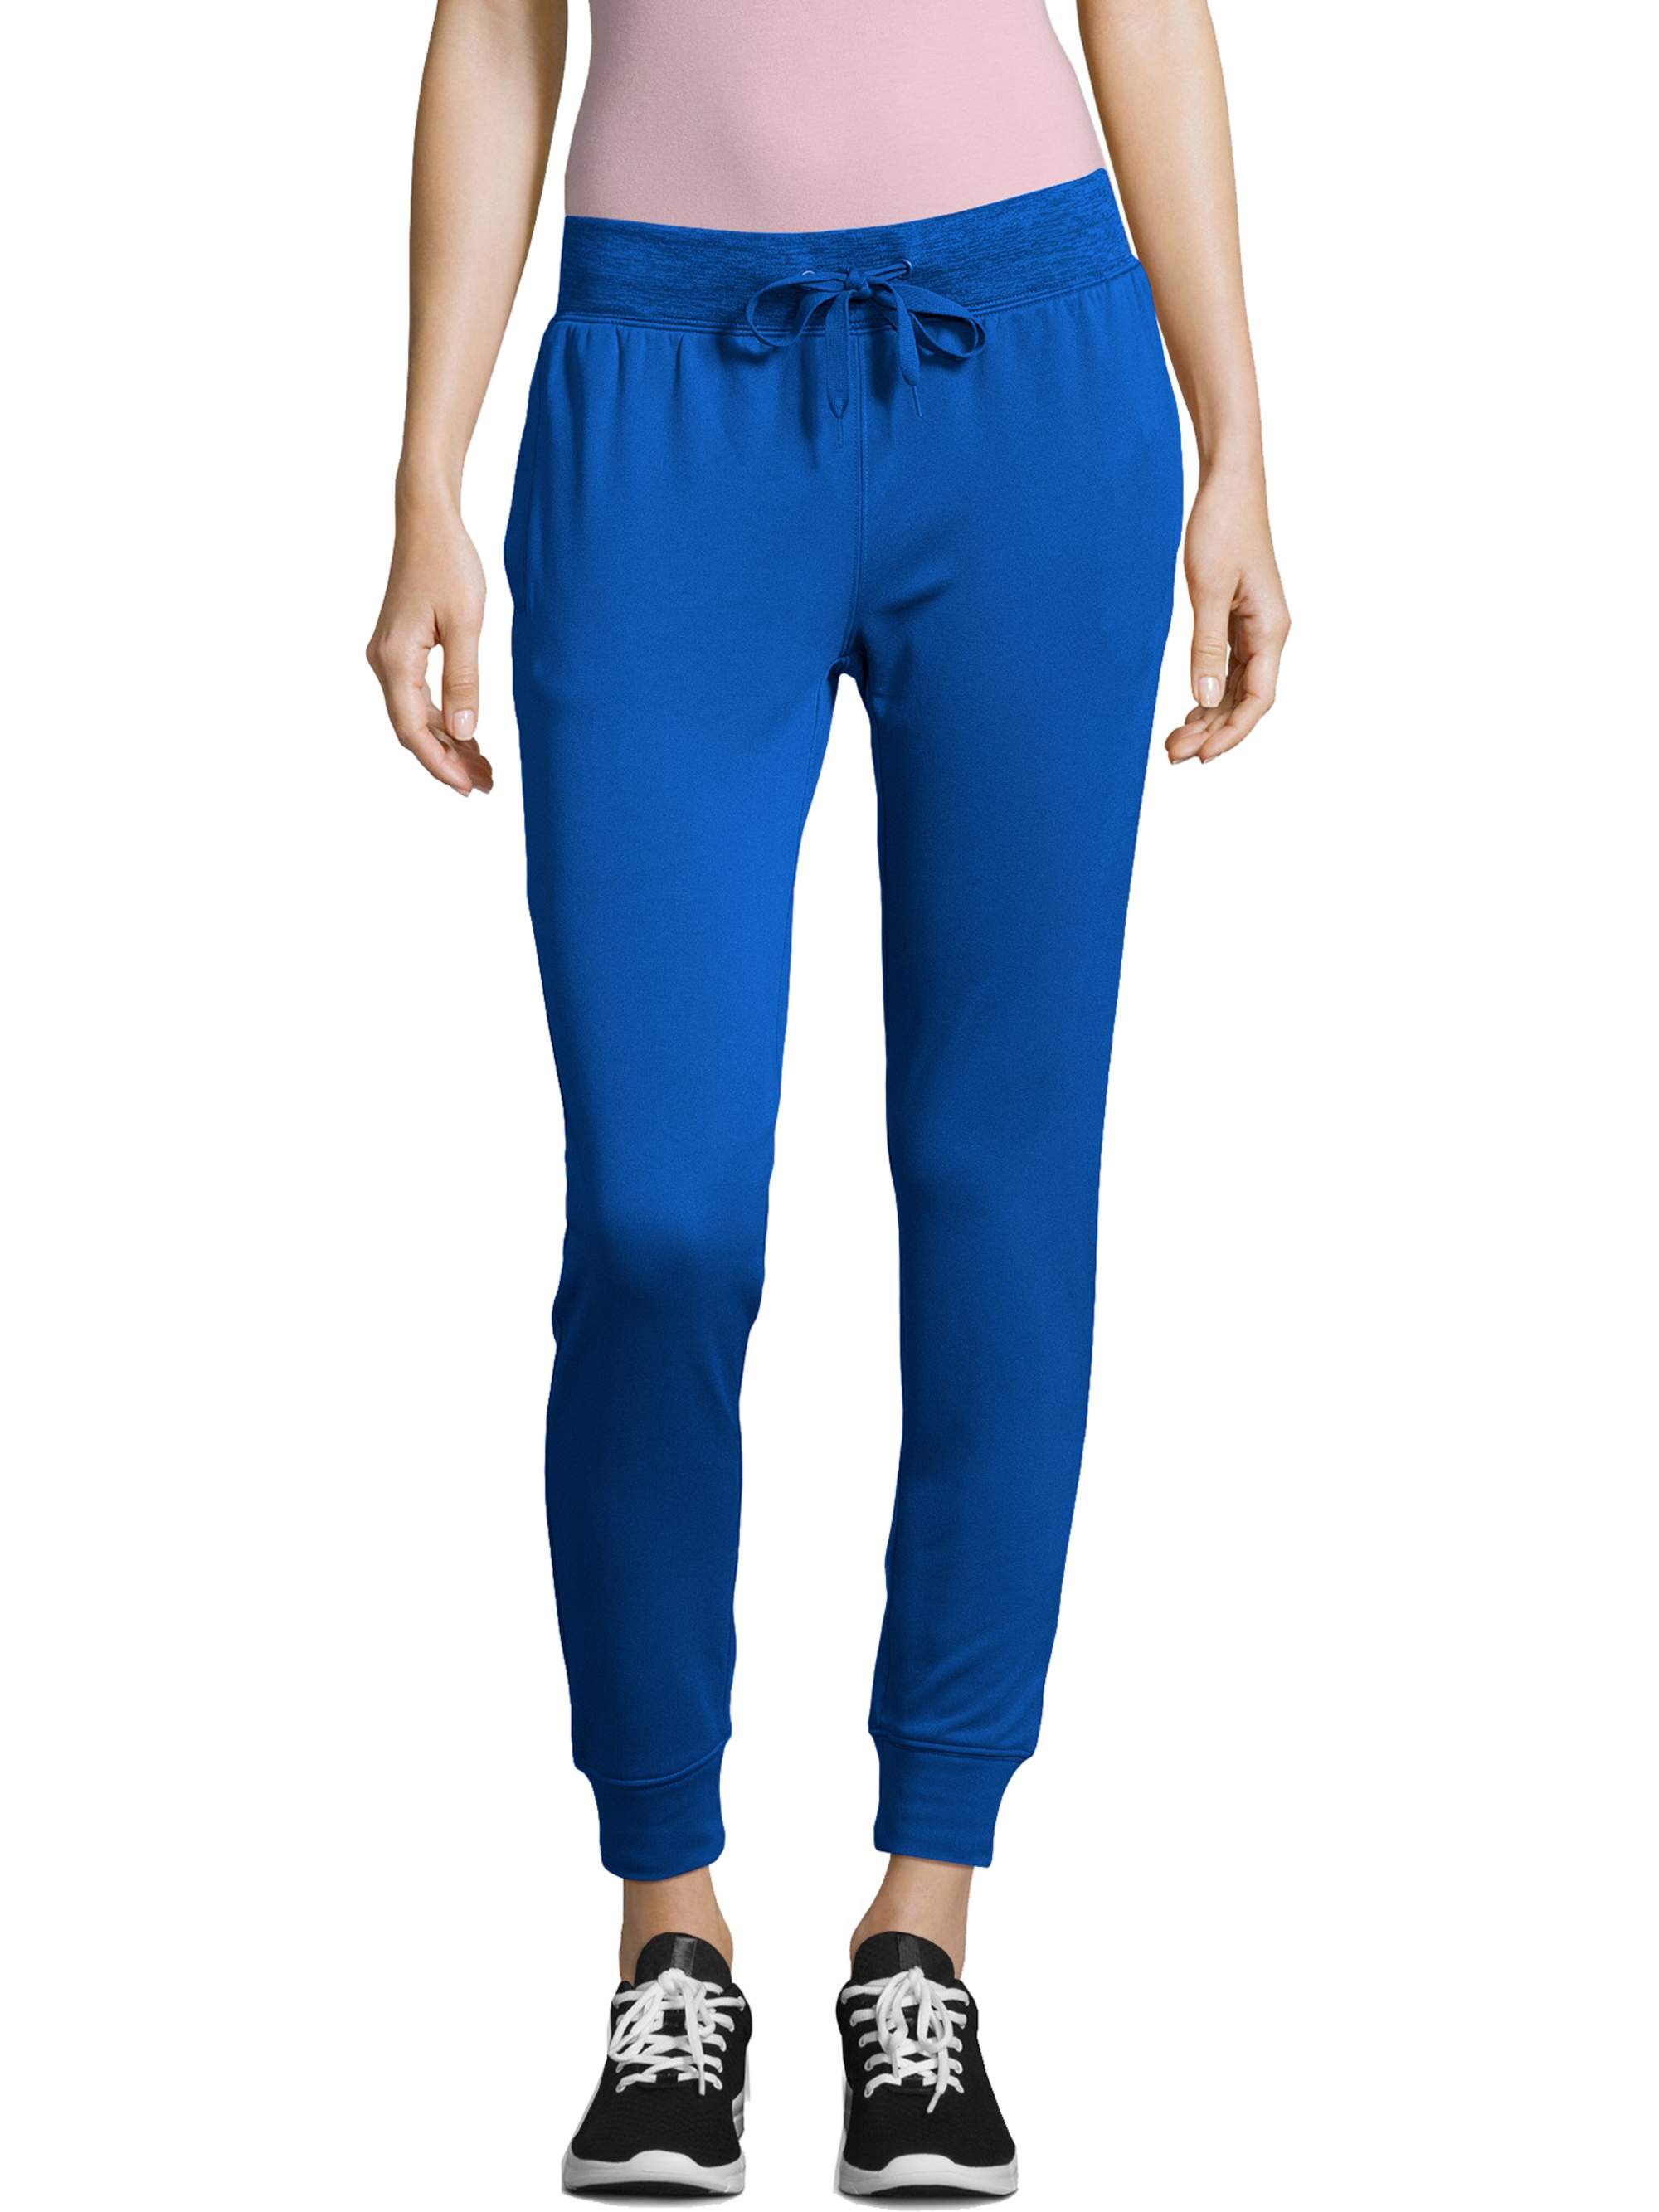 Hanes Sport Women's Performance Fleece Jogger Pants with Pockets - image 1 of 5